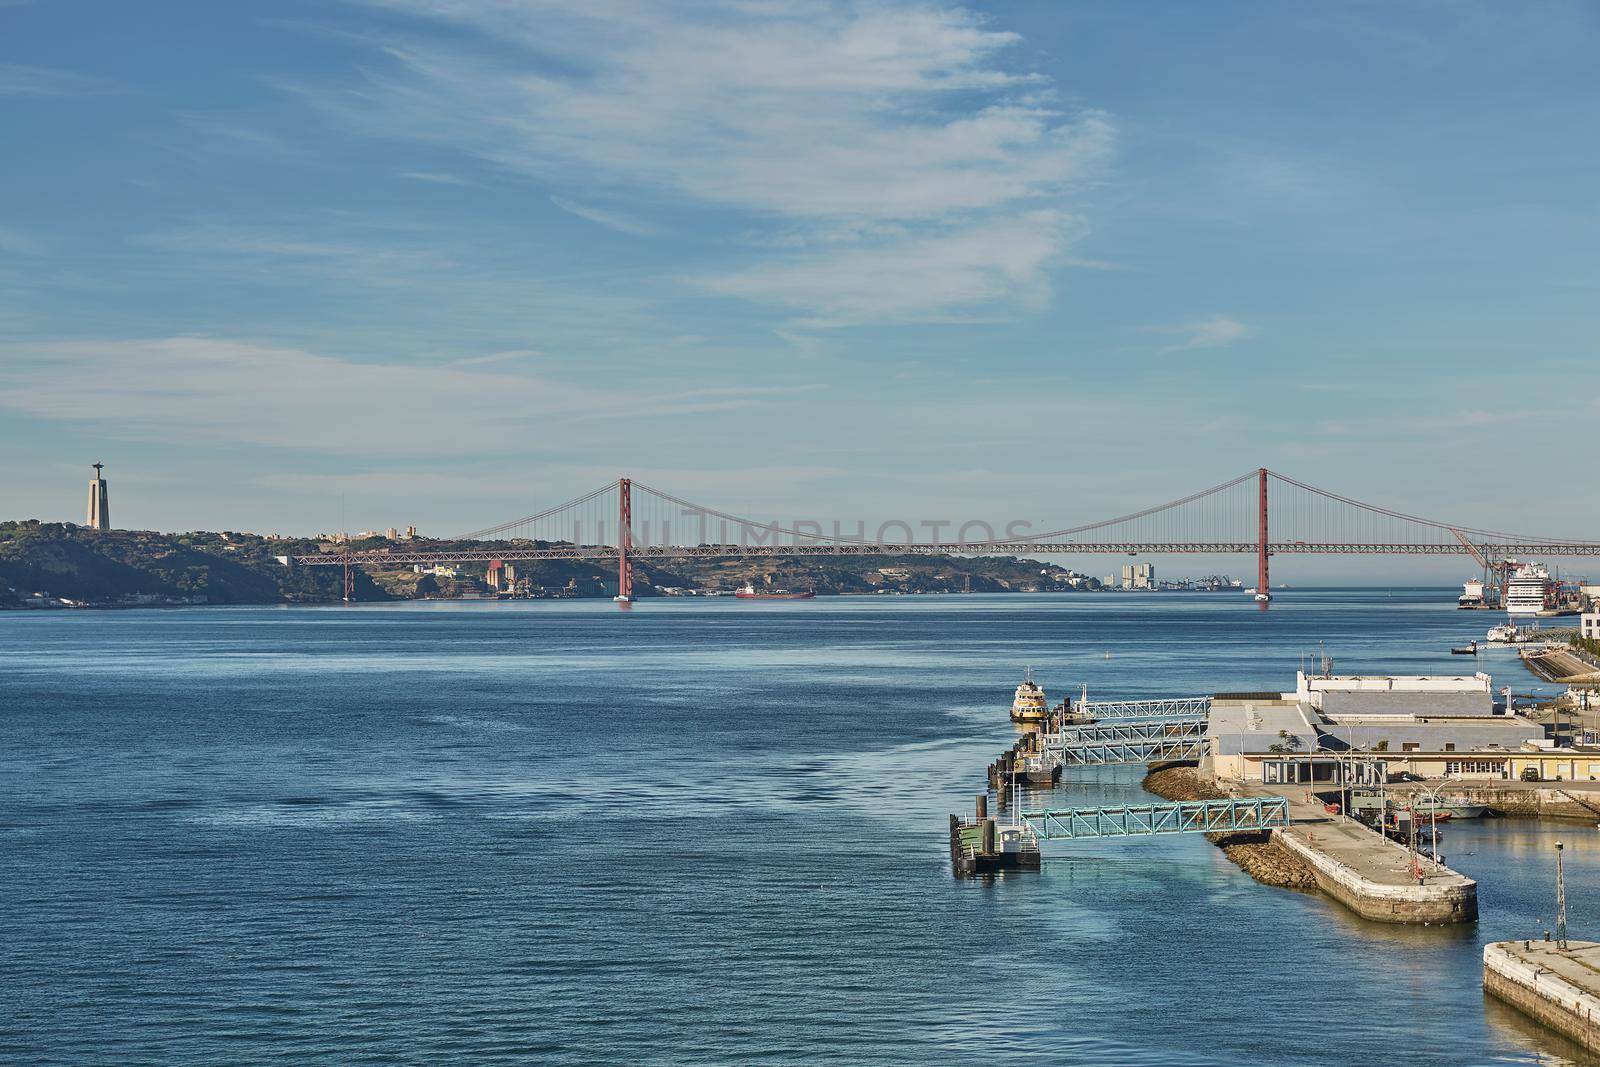 The 25 April bridge (Ponte 25 de Abril) is a steel suspension bridge located in Lisbon, Portugal, crossing the Tagus river. It is one of the most famous landmarks of the region by wondry